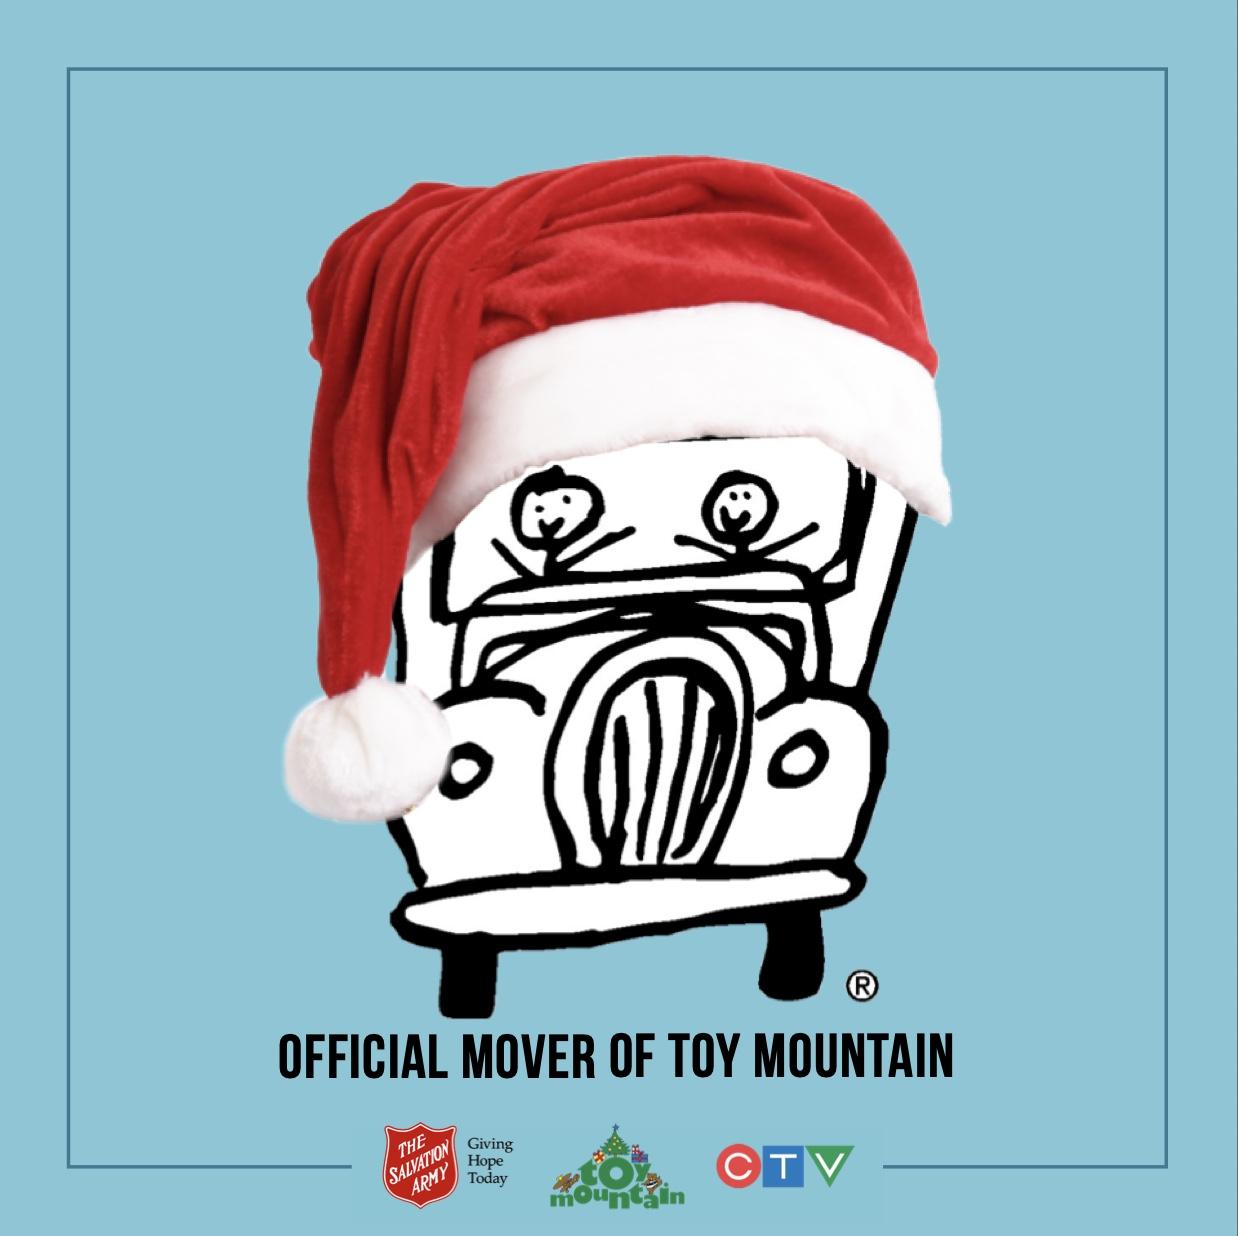 Very proud to have partnered with Toy Mountain